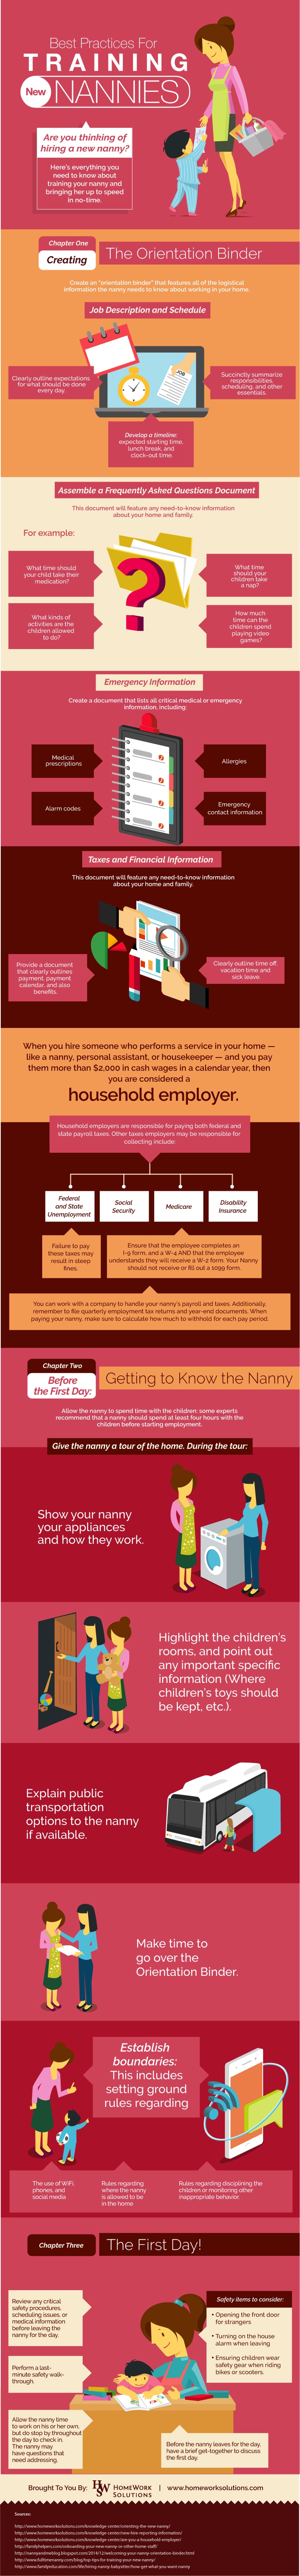 Best Practices for Training New Nannies